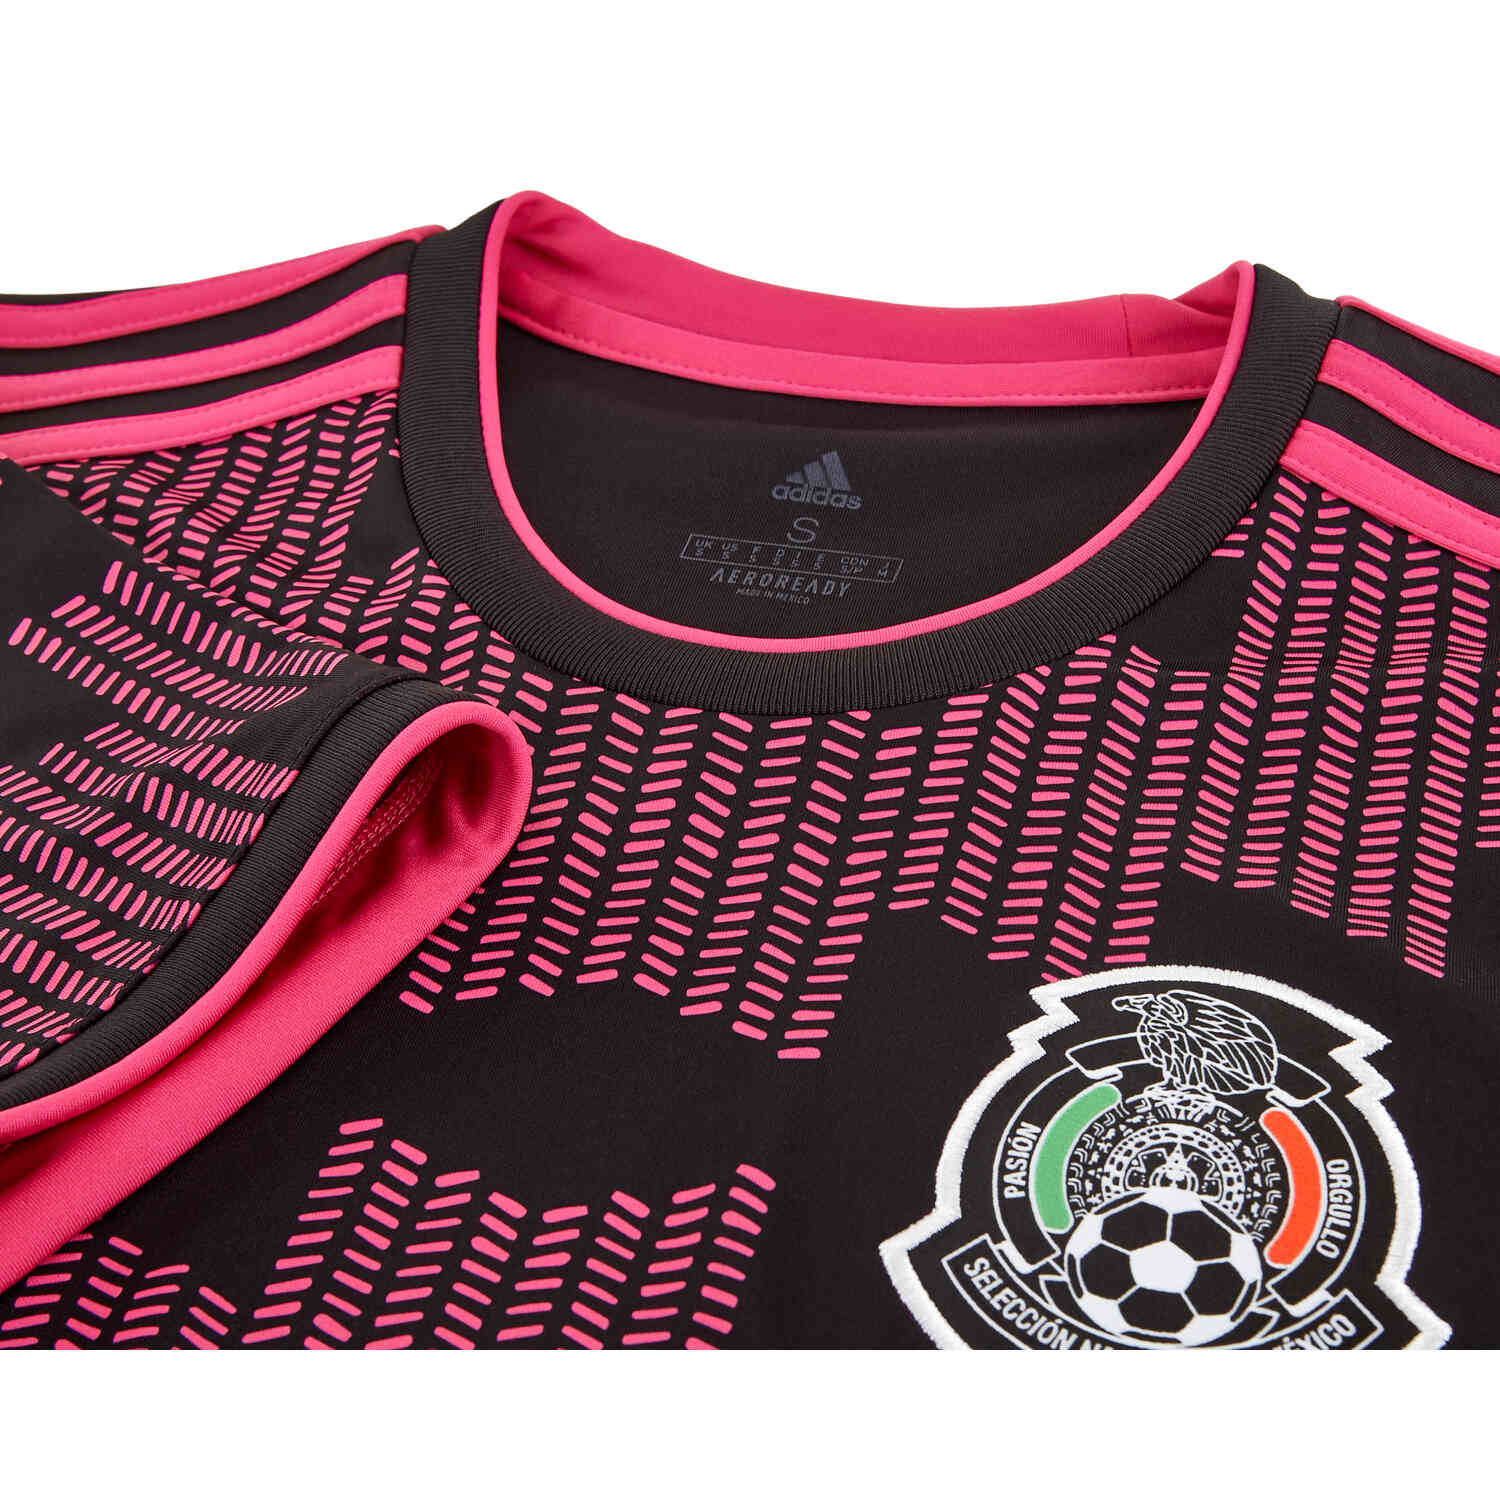 Chicharito Mexico 2021 Women's Home Jersey by Adidas - Size XL